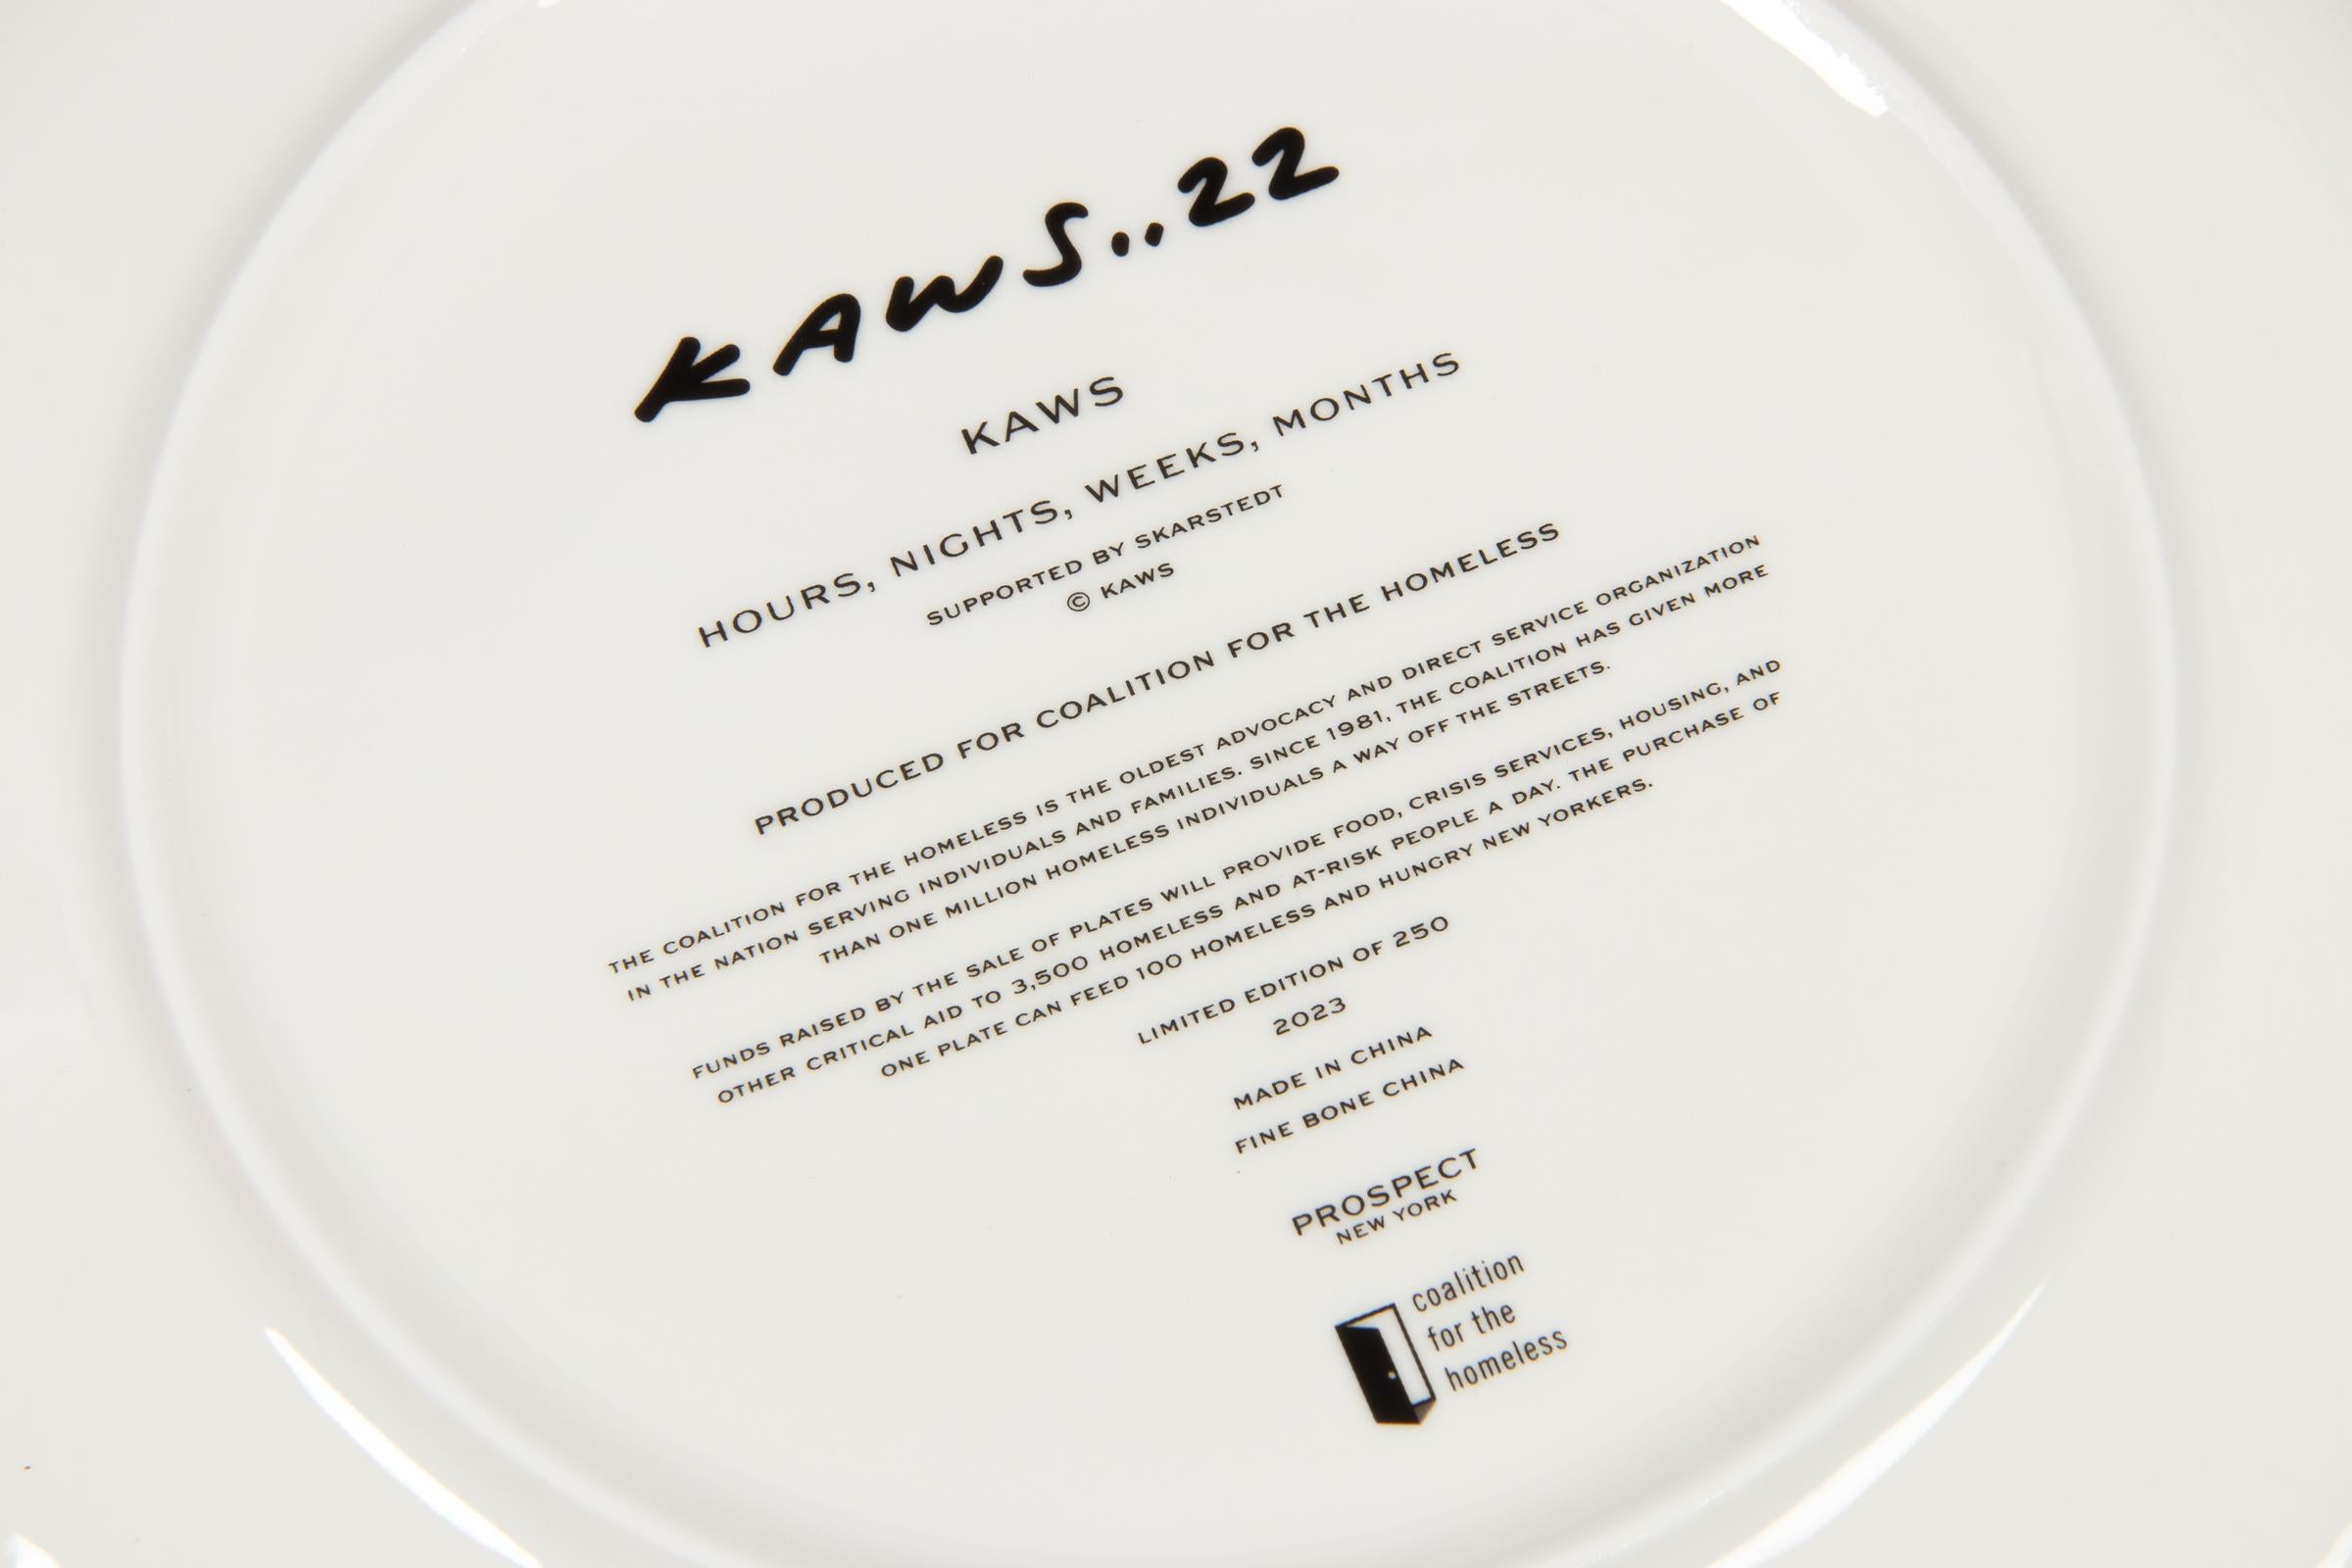 KAWS (American, b. 1974)
Hours, Nights, Weeks, Months, 2023
Medium: Porcelain plate (fine bone china)
Dimensions: 10 1/2 in diameter  26.7 cm diameter
Edition of 250: Printed signature and edition details on verso
Condition: Mint (in original